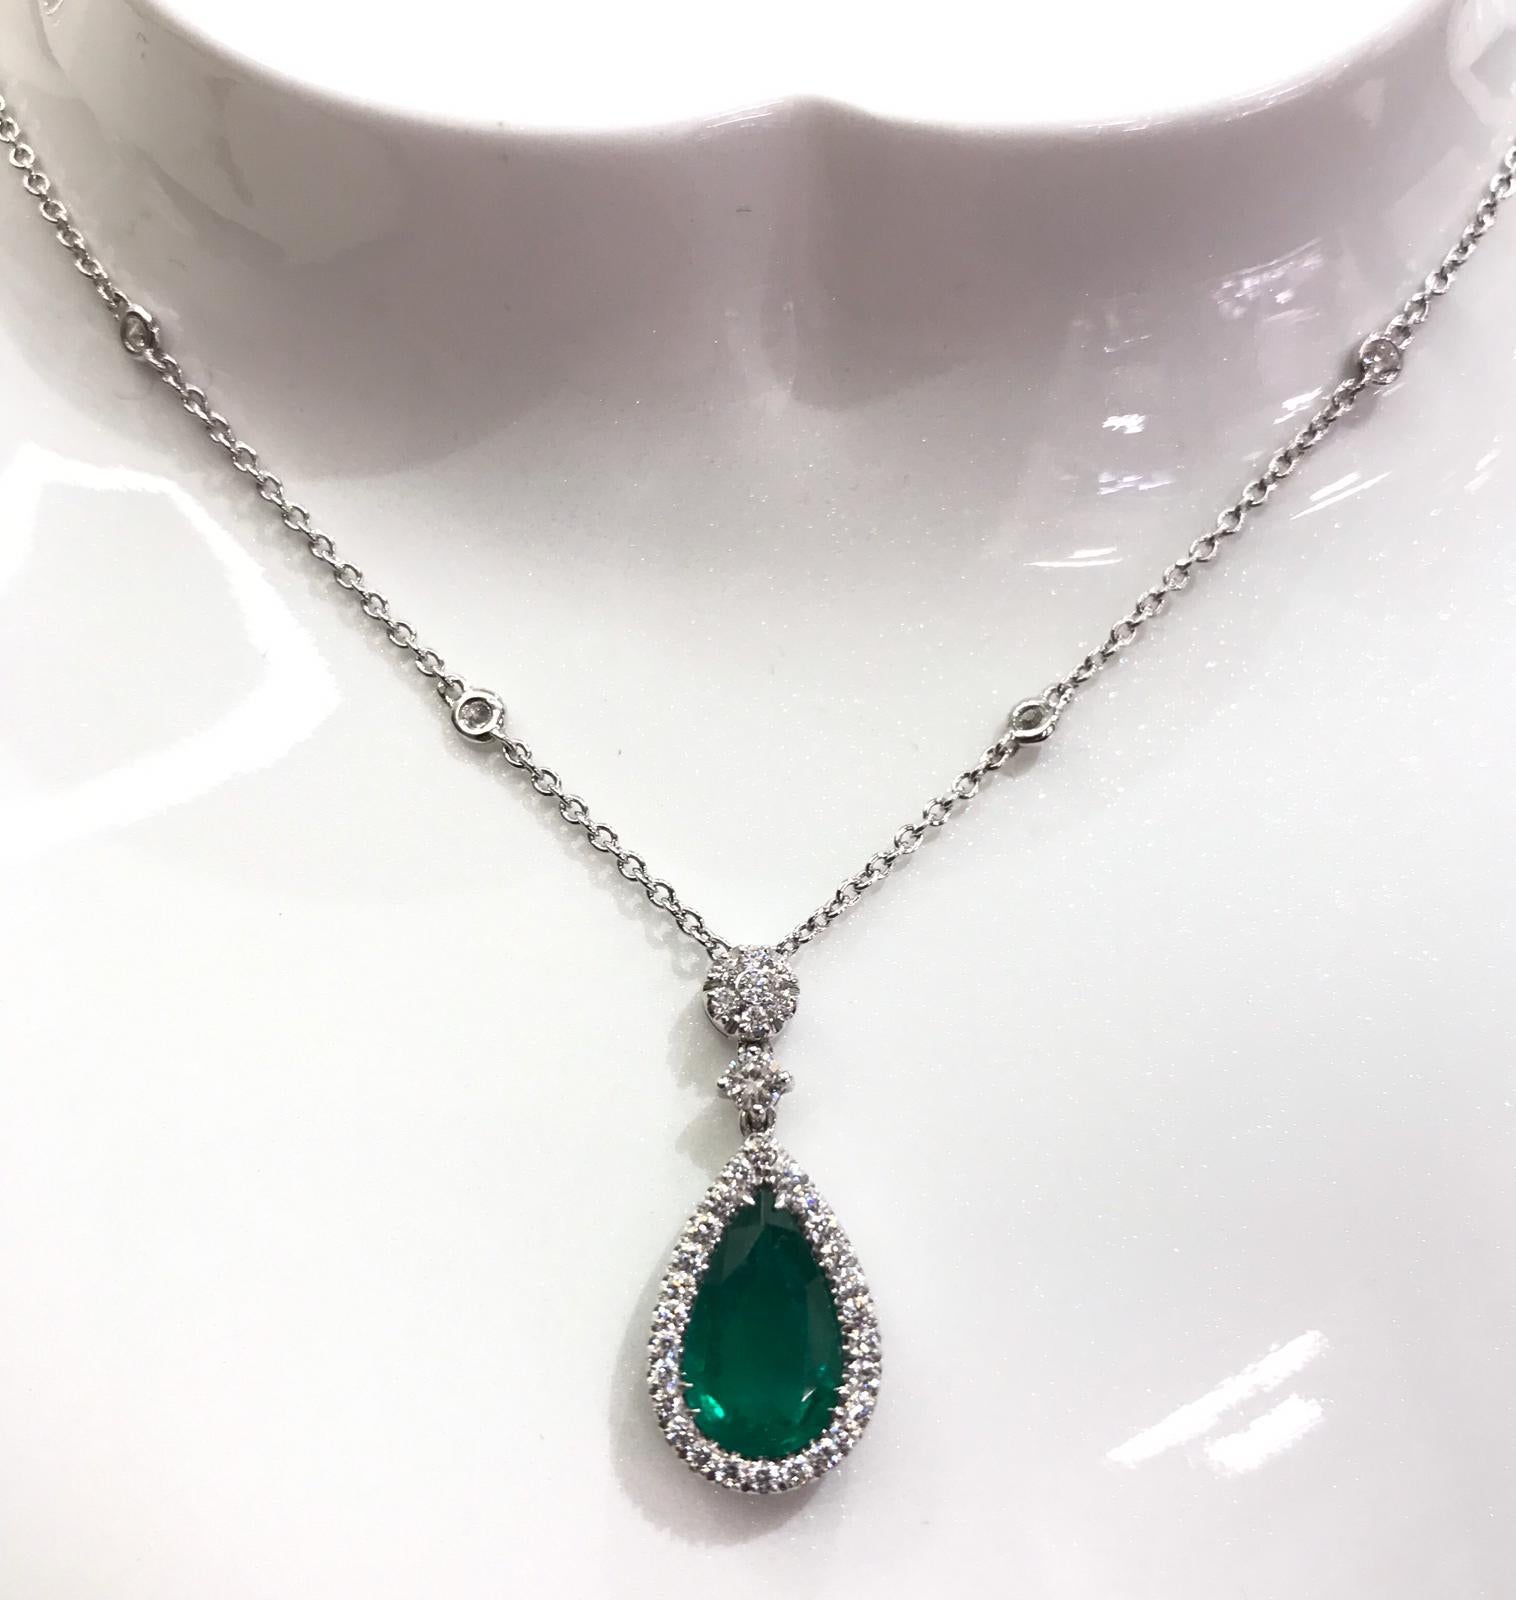 Pendant with a Certified Drop Emerald, Diamonds and Pear Cut Emerald on Top.
Delicious Cut, Proportion and Brightness for the Emerald ct. 1.81 Vivid Green Pear-Shape Mixed Cut Transparent. Diamonds on the chain. 
Diamonds around the Emerald are ct.